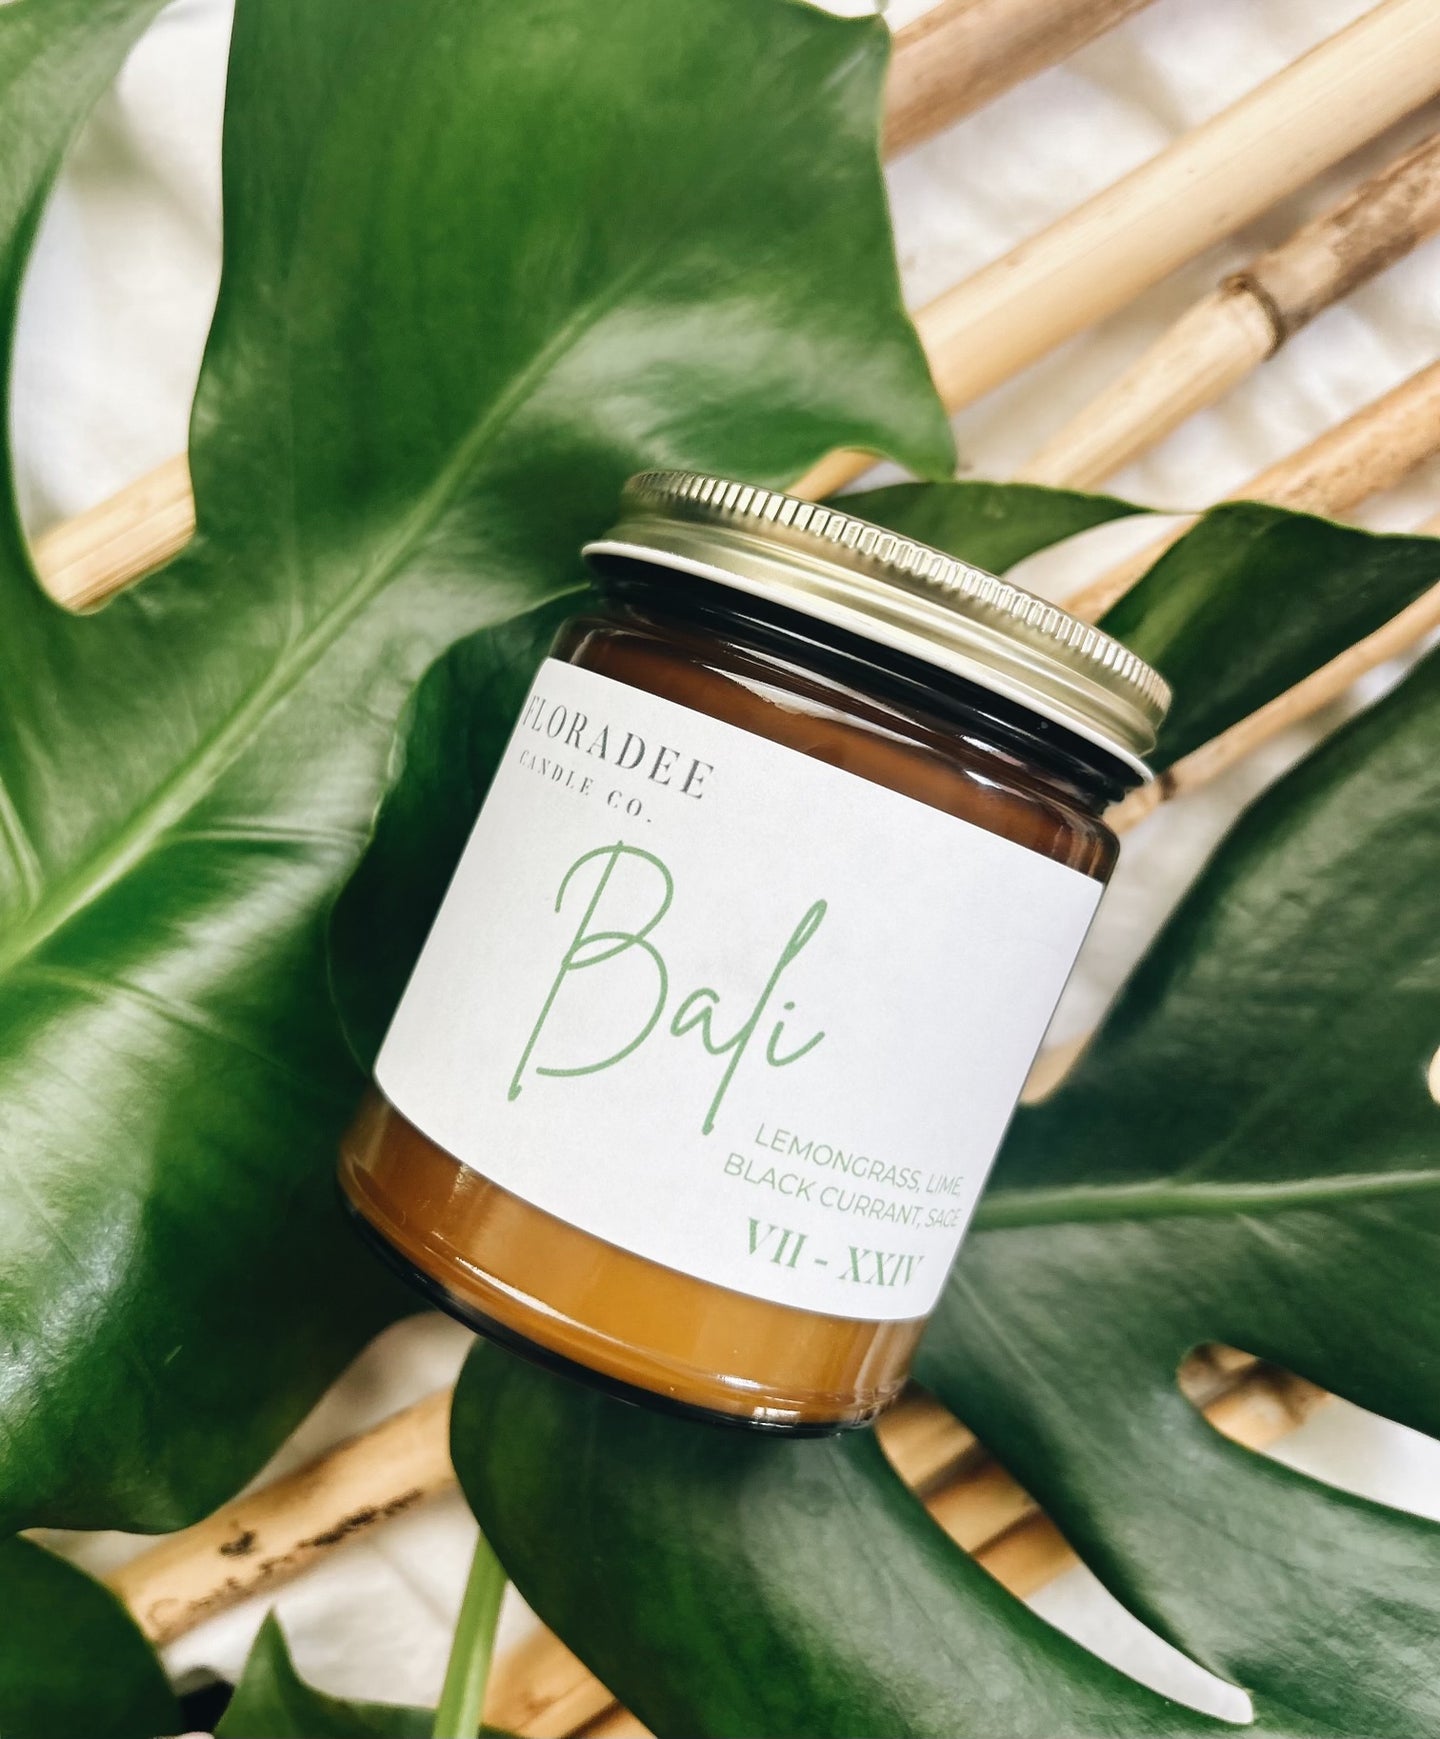 July Candle of the Month - Bali